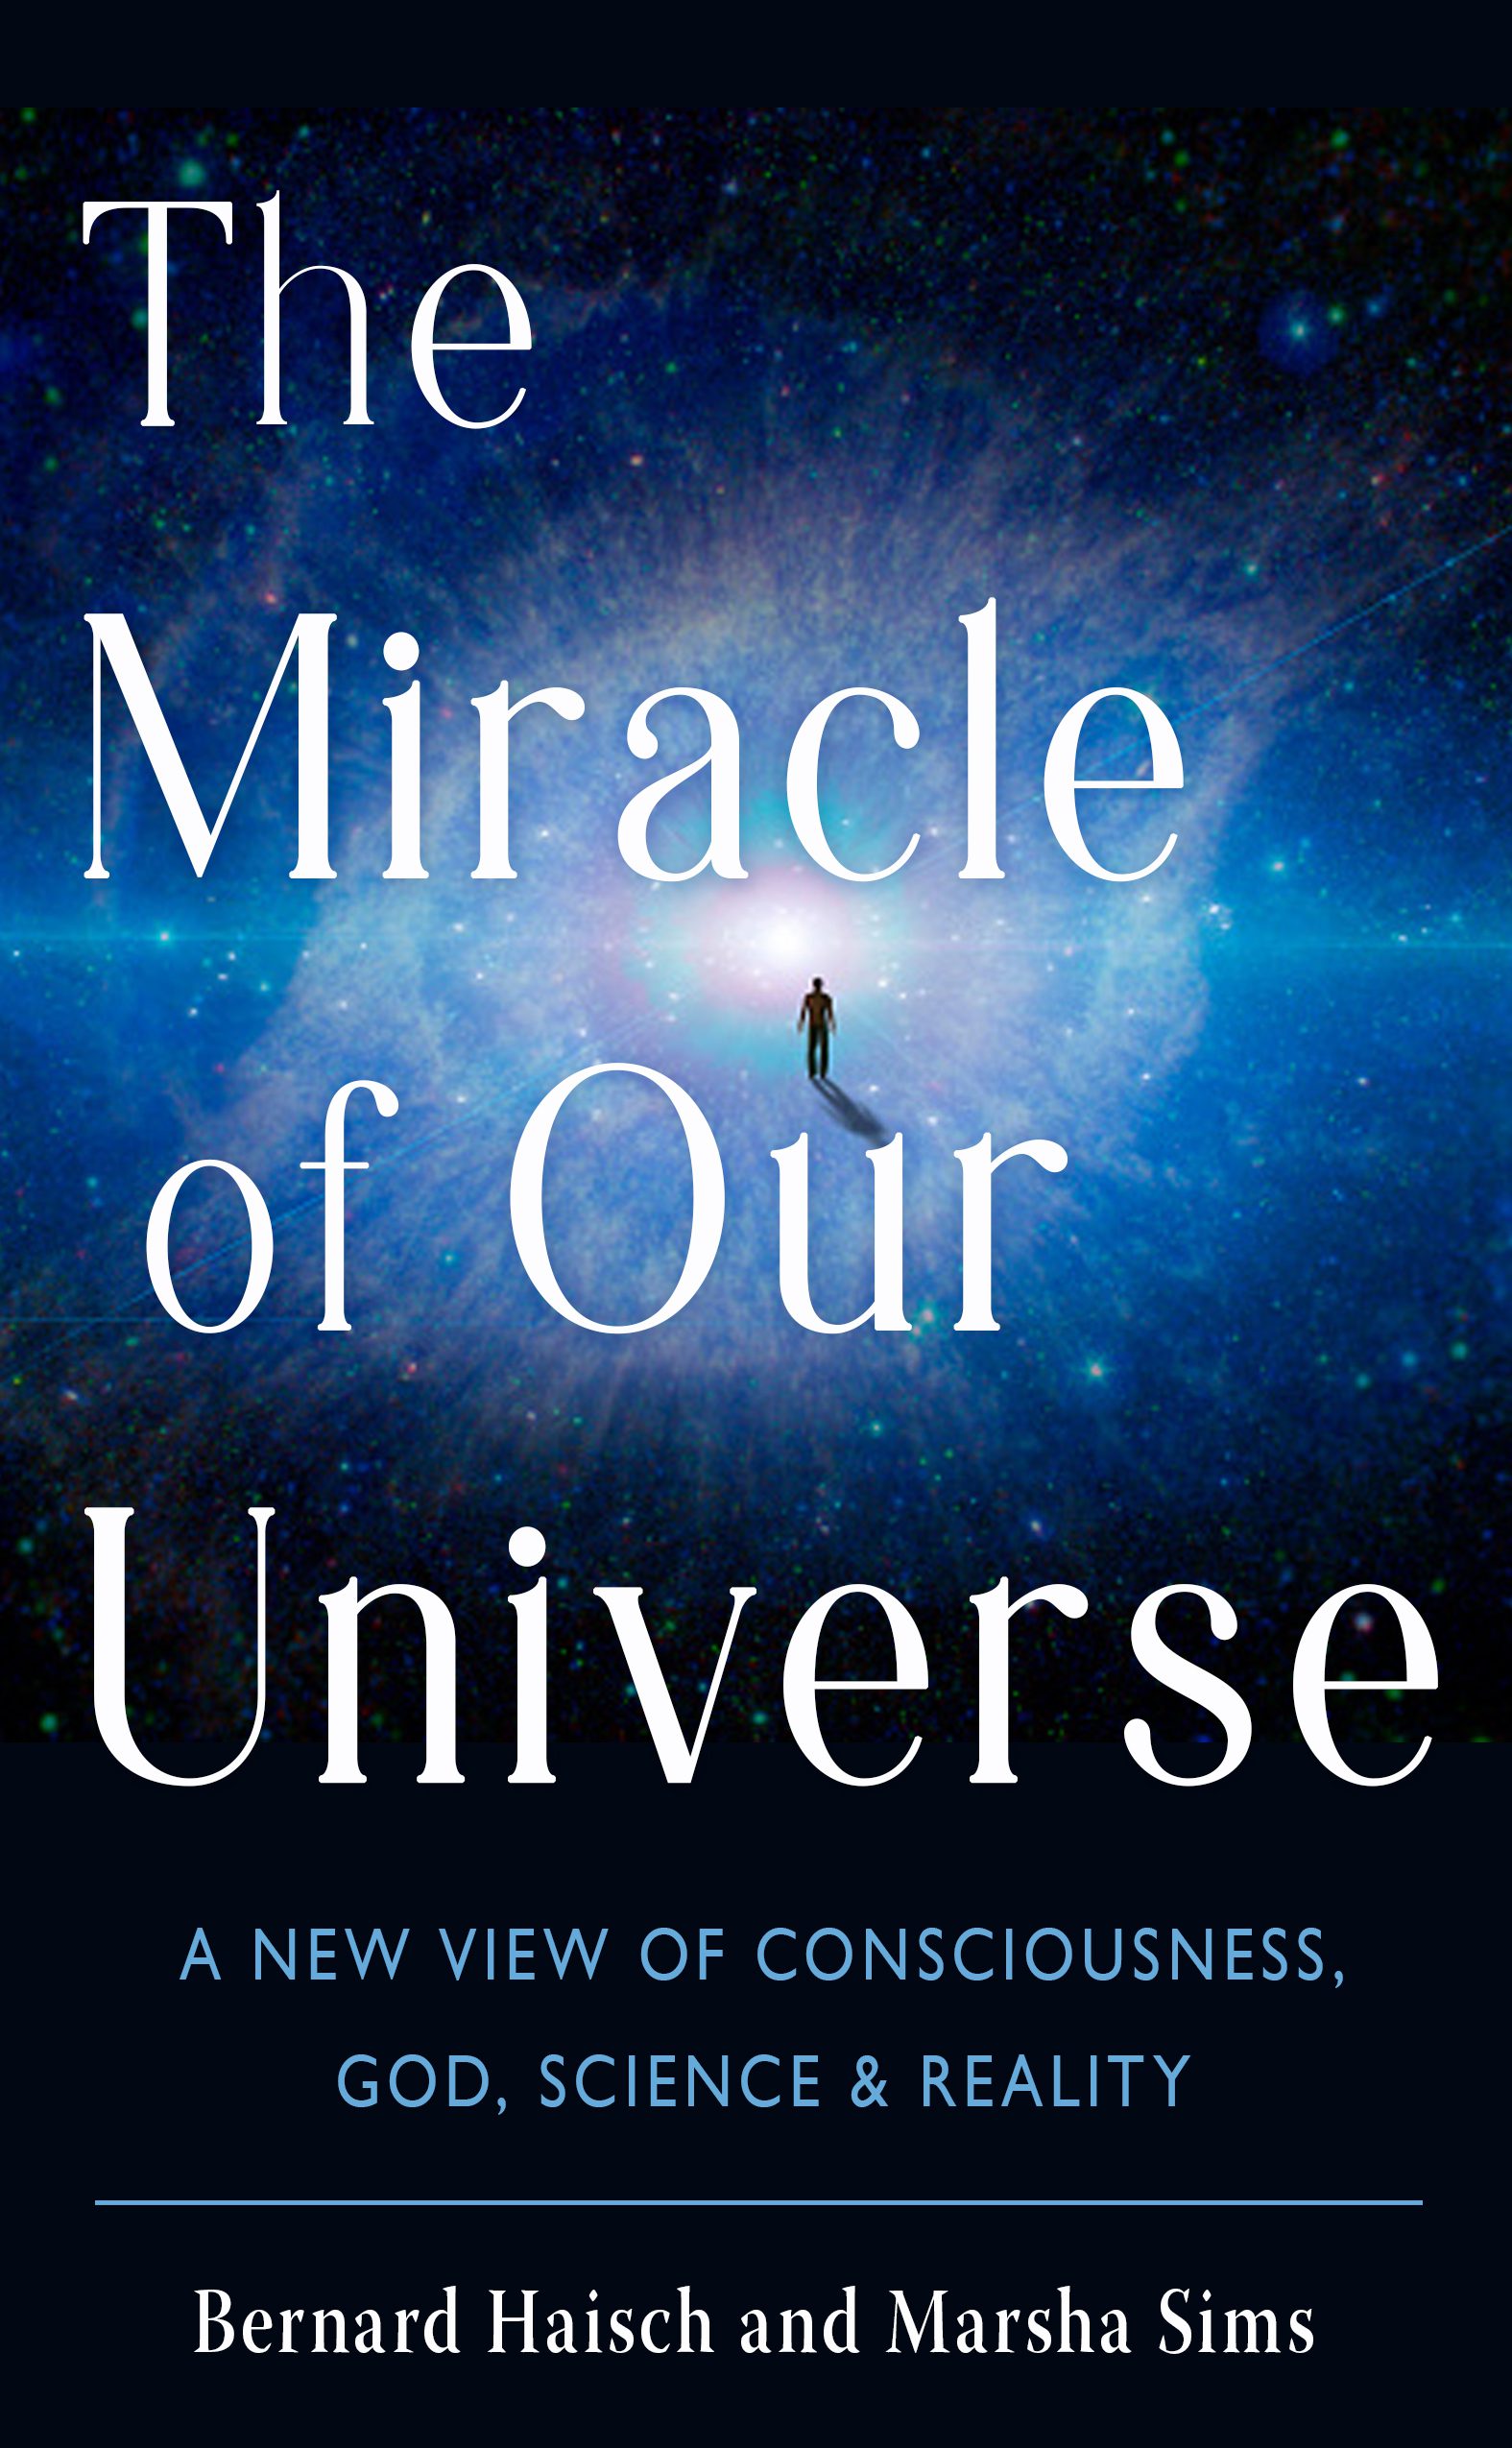 The Miracle of Our Universe